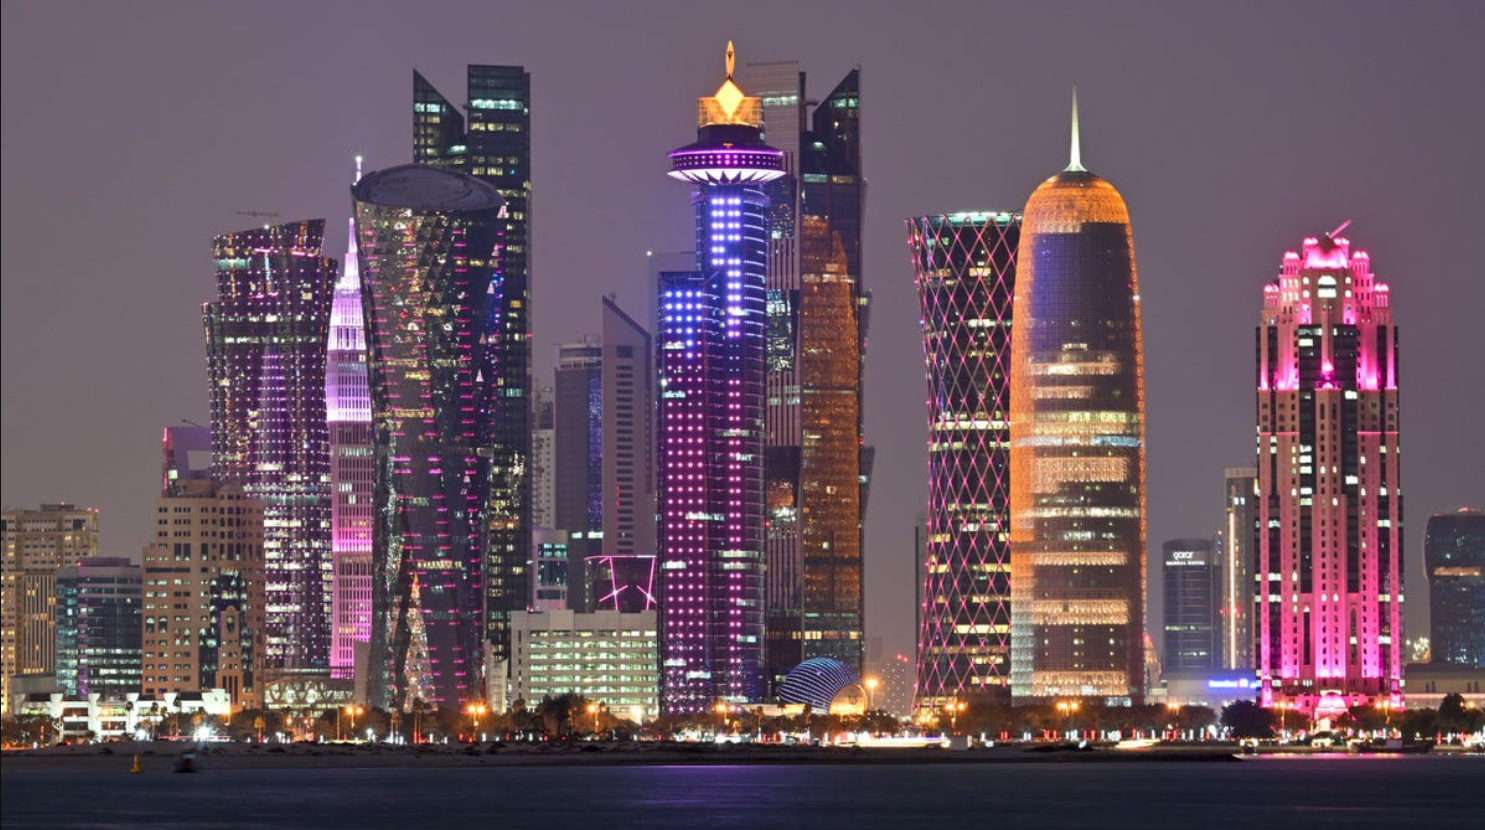 Sex ban enforced by Qatar ahead of the 2022 World Cup